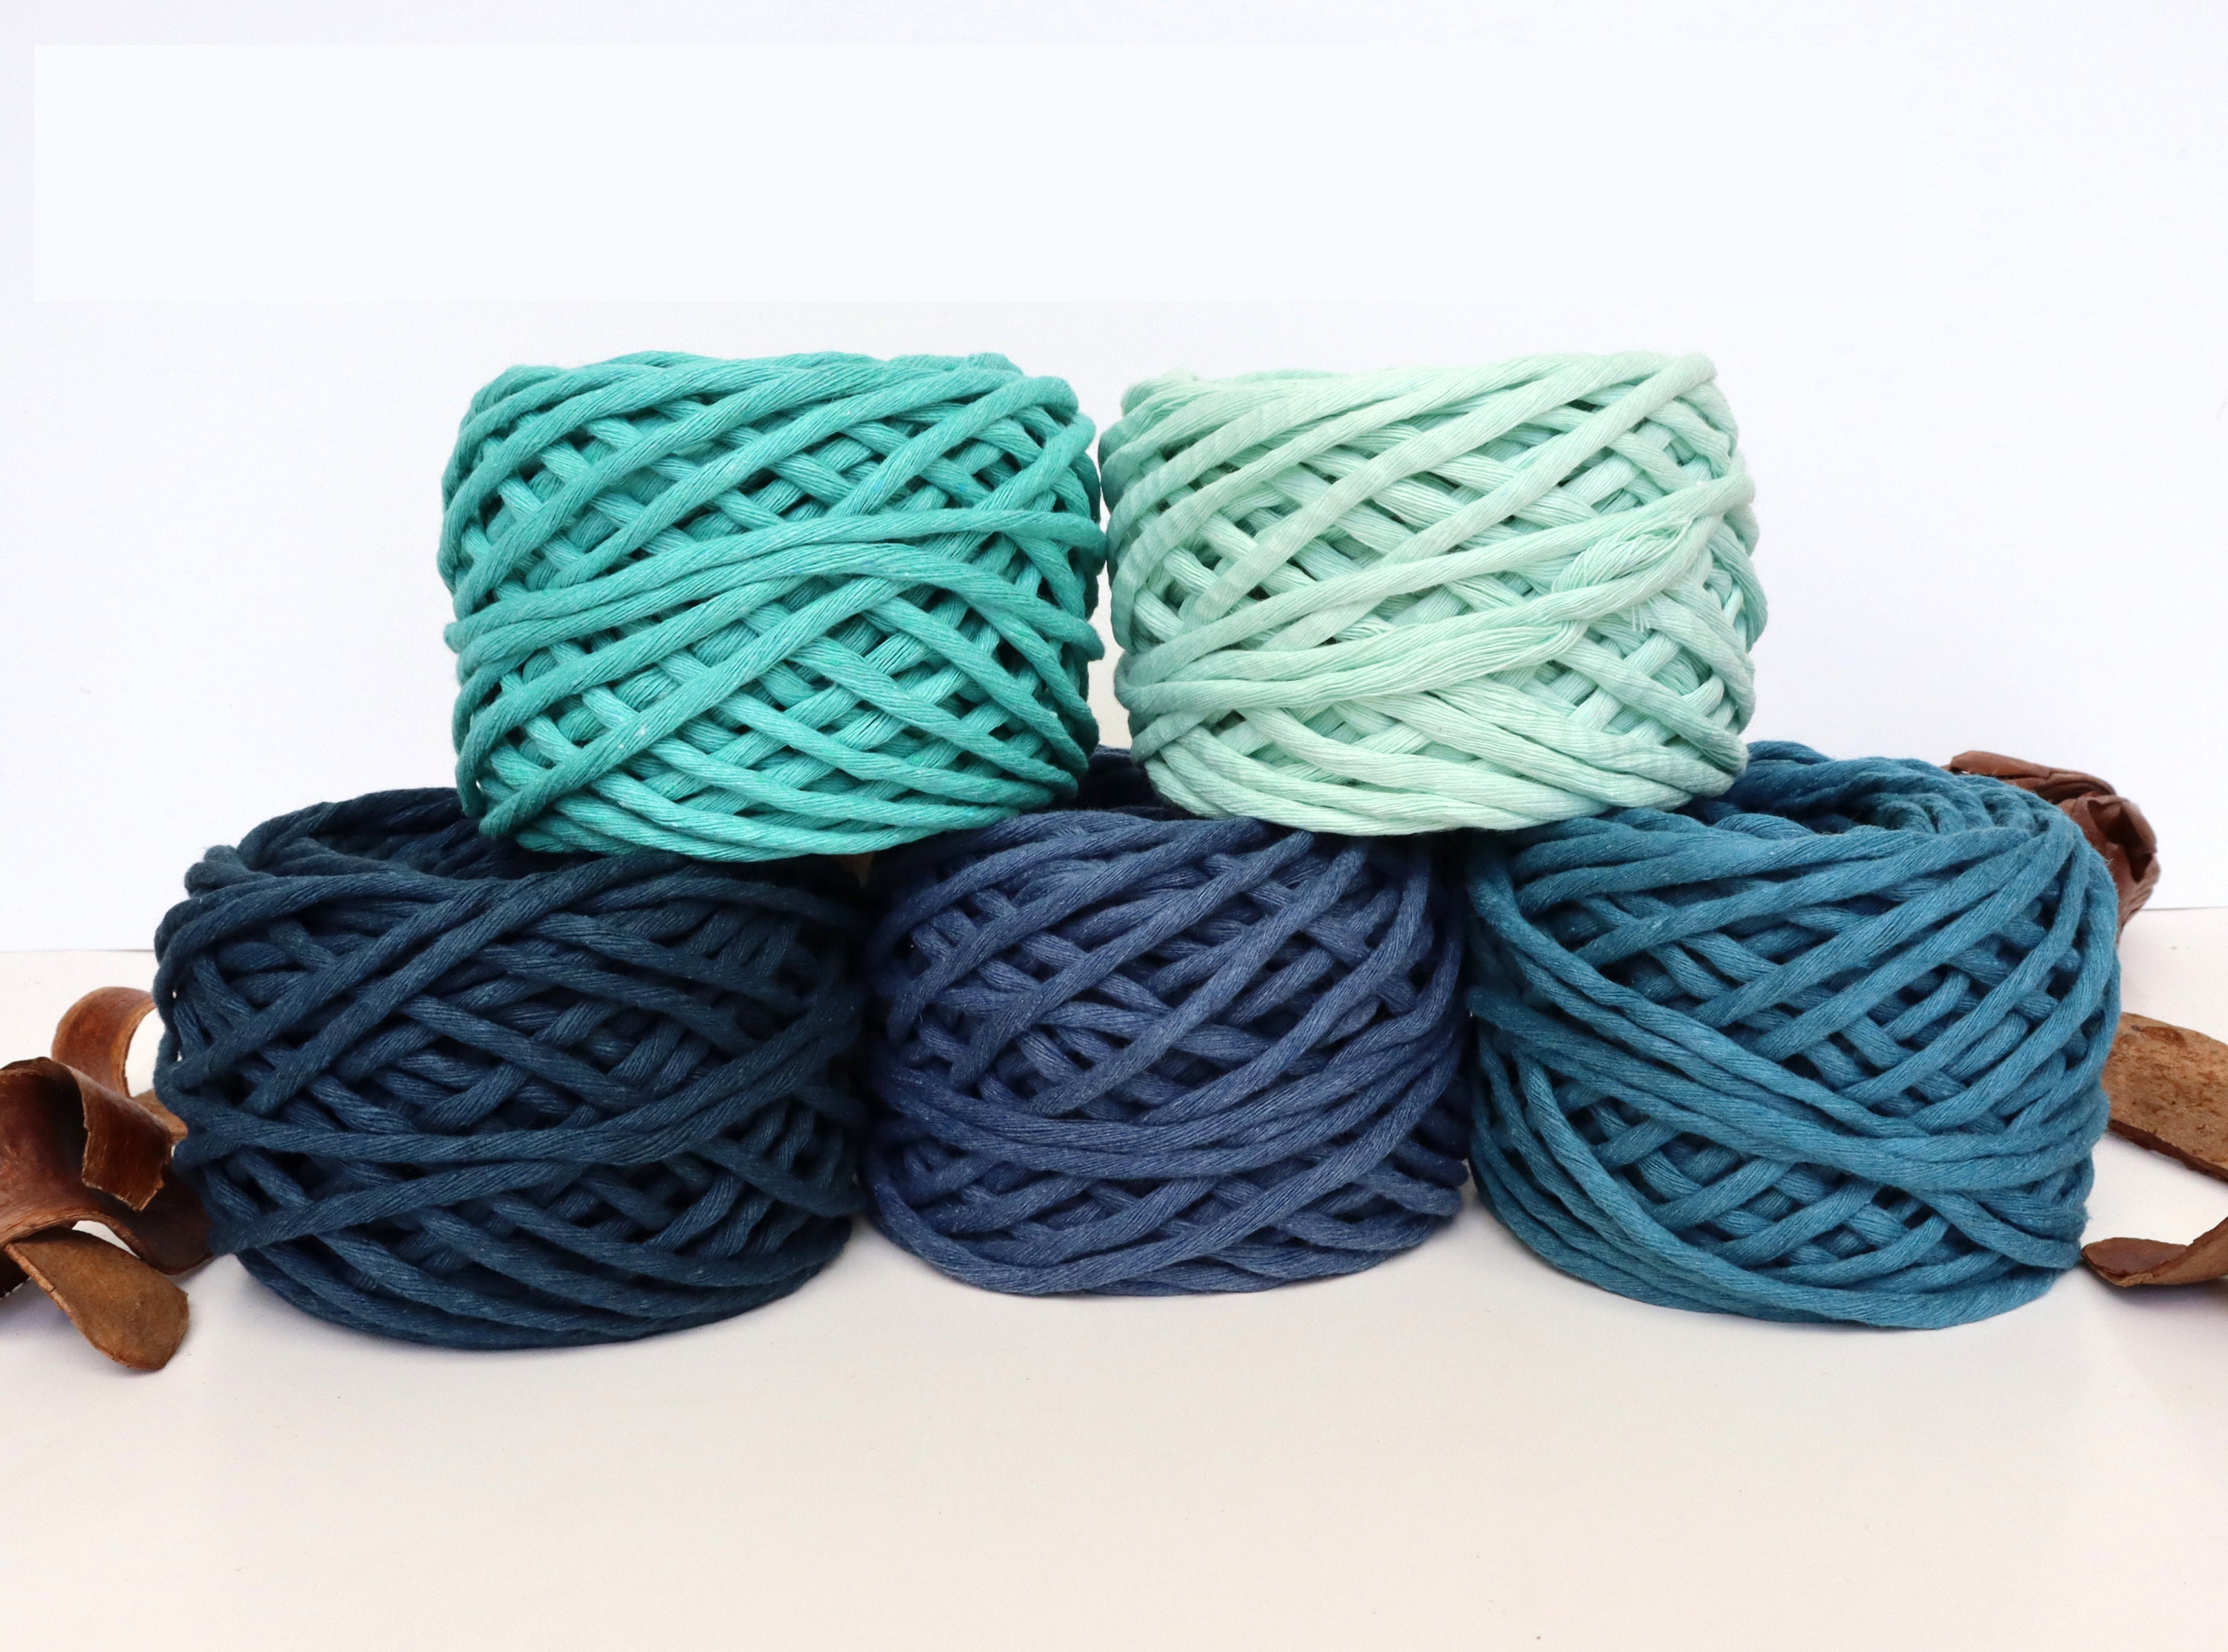 6MM Cotton Rope 1/4 Inch Macrame Cord Super Soft Weaving Cord Three Strand  Twisted Cotton Rope Blue Green Variety Macrame Rope 